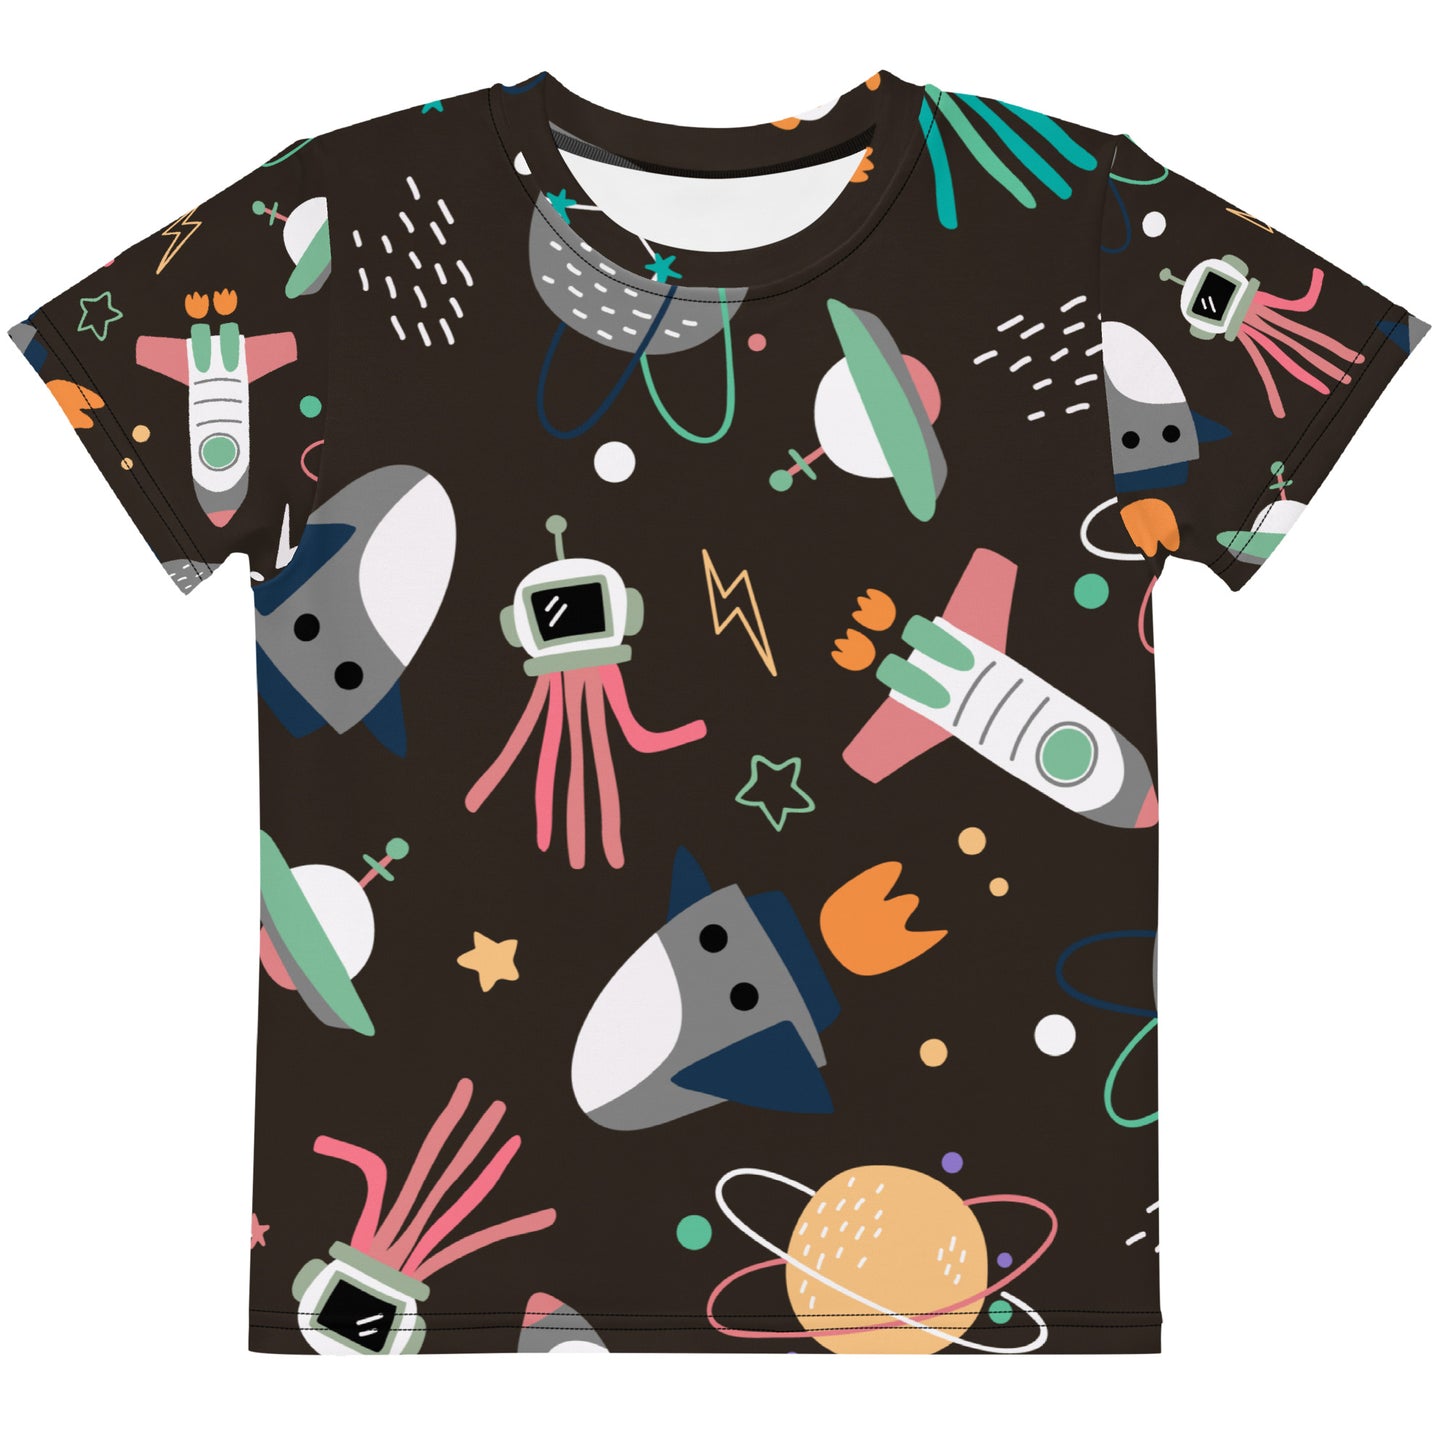 "Spaced Out" Kids T-shirt